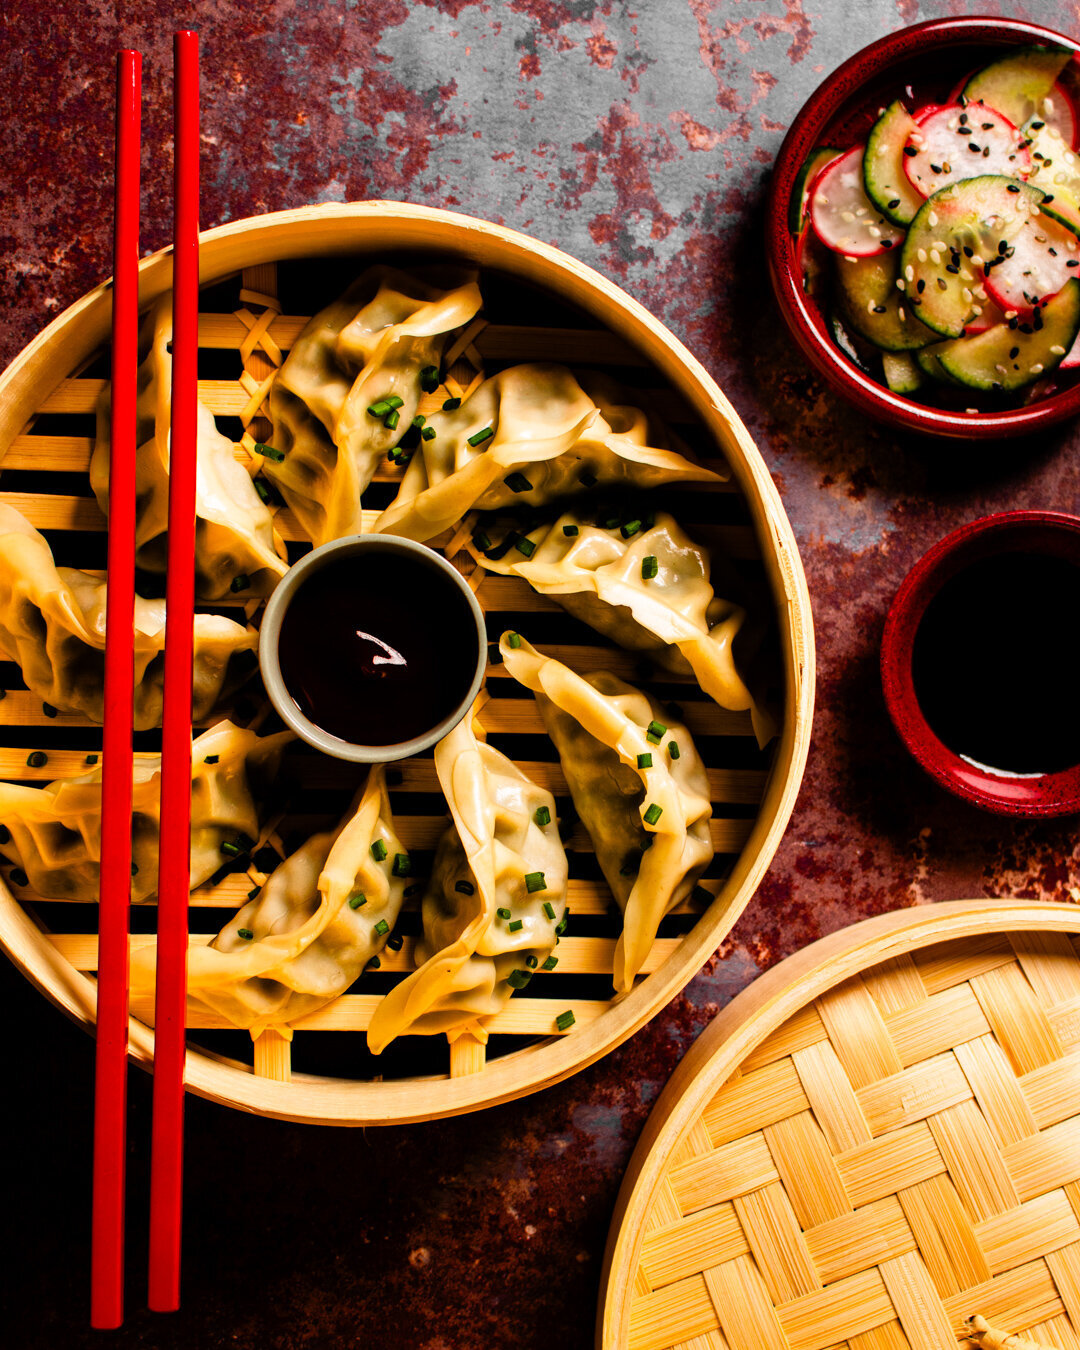 gyoza in a bamboo steamer with salad